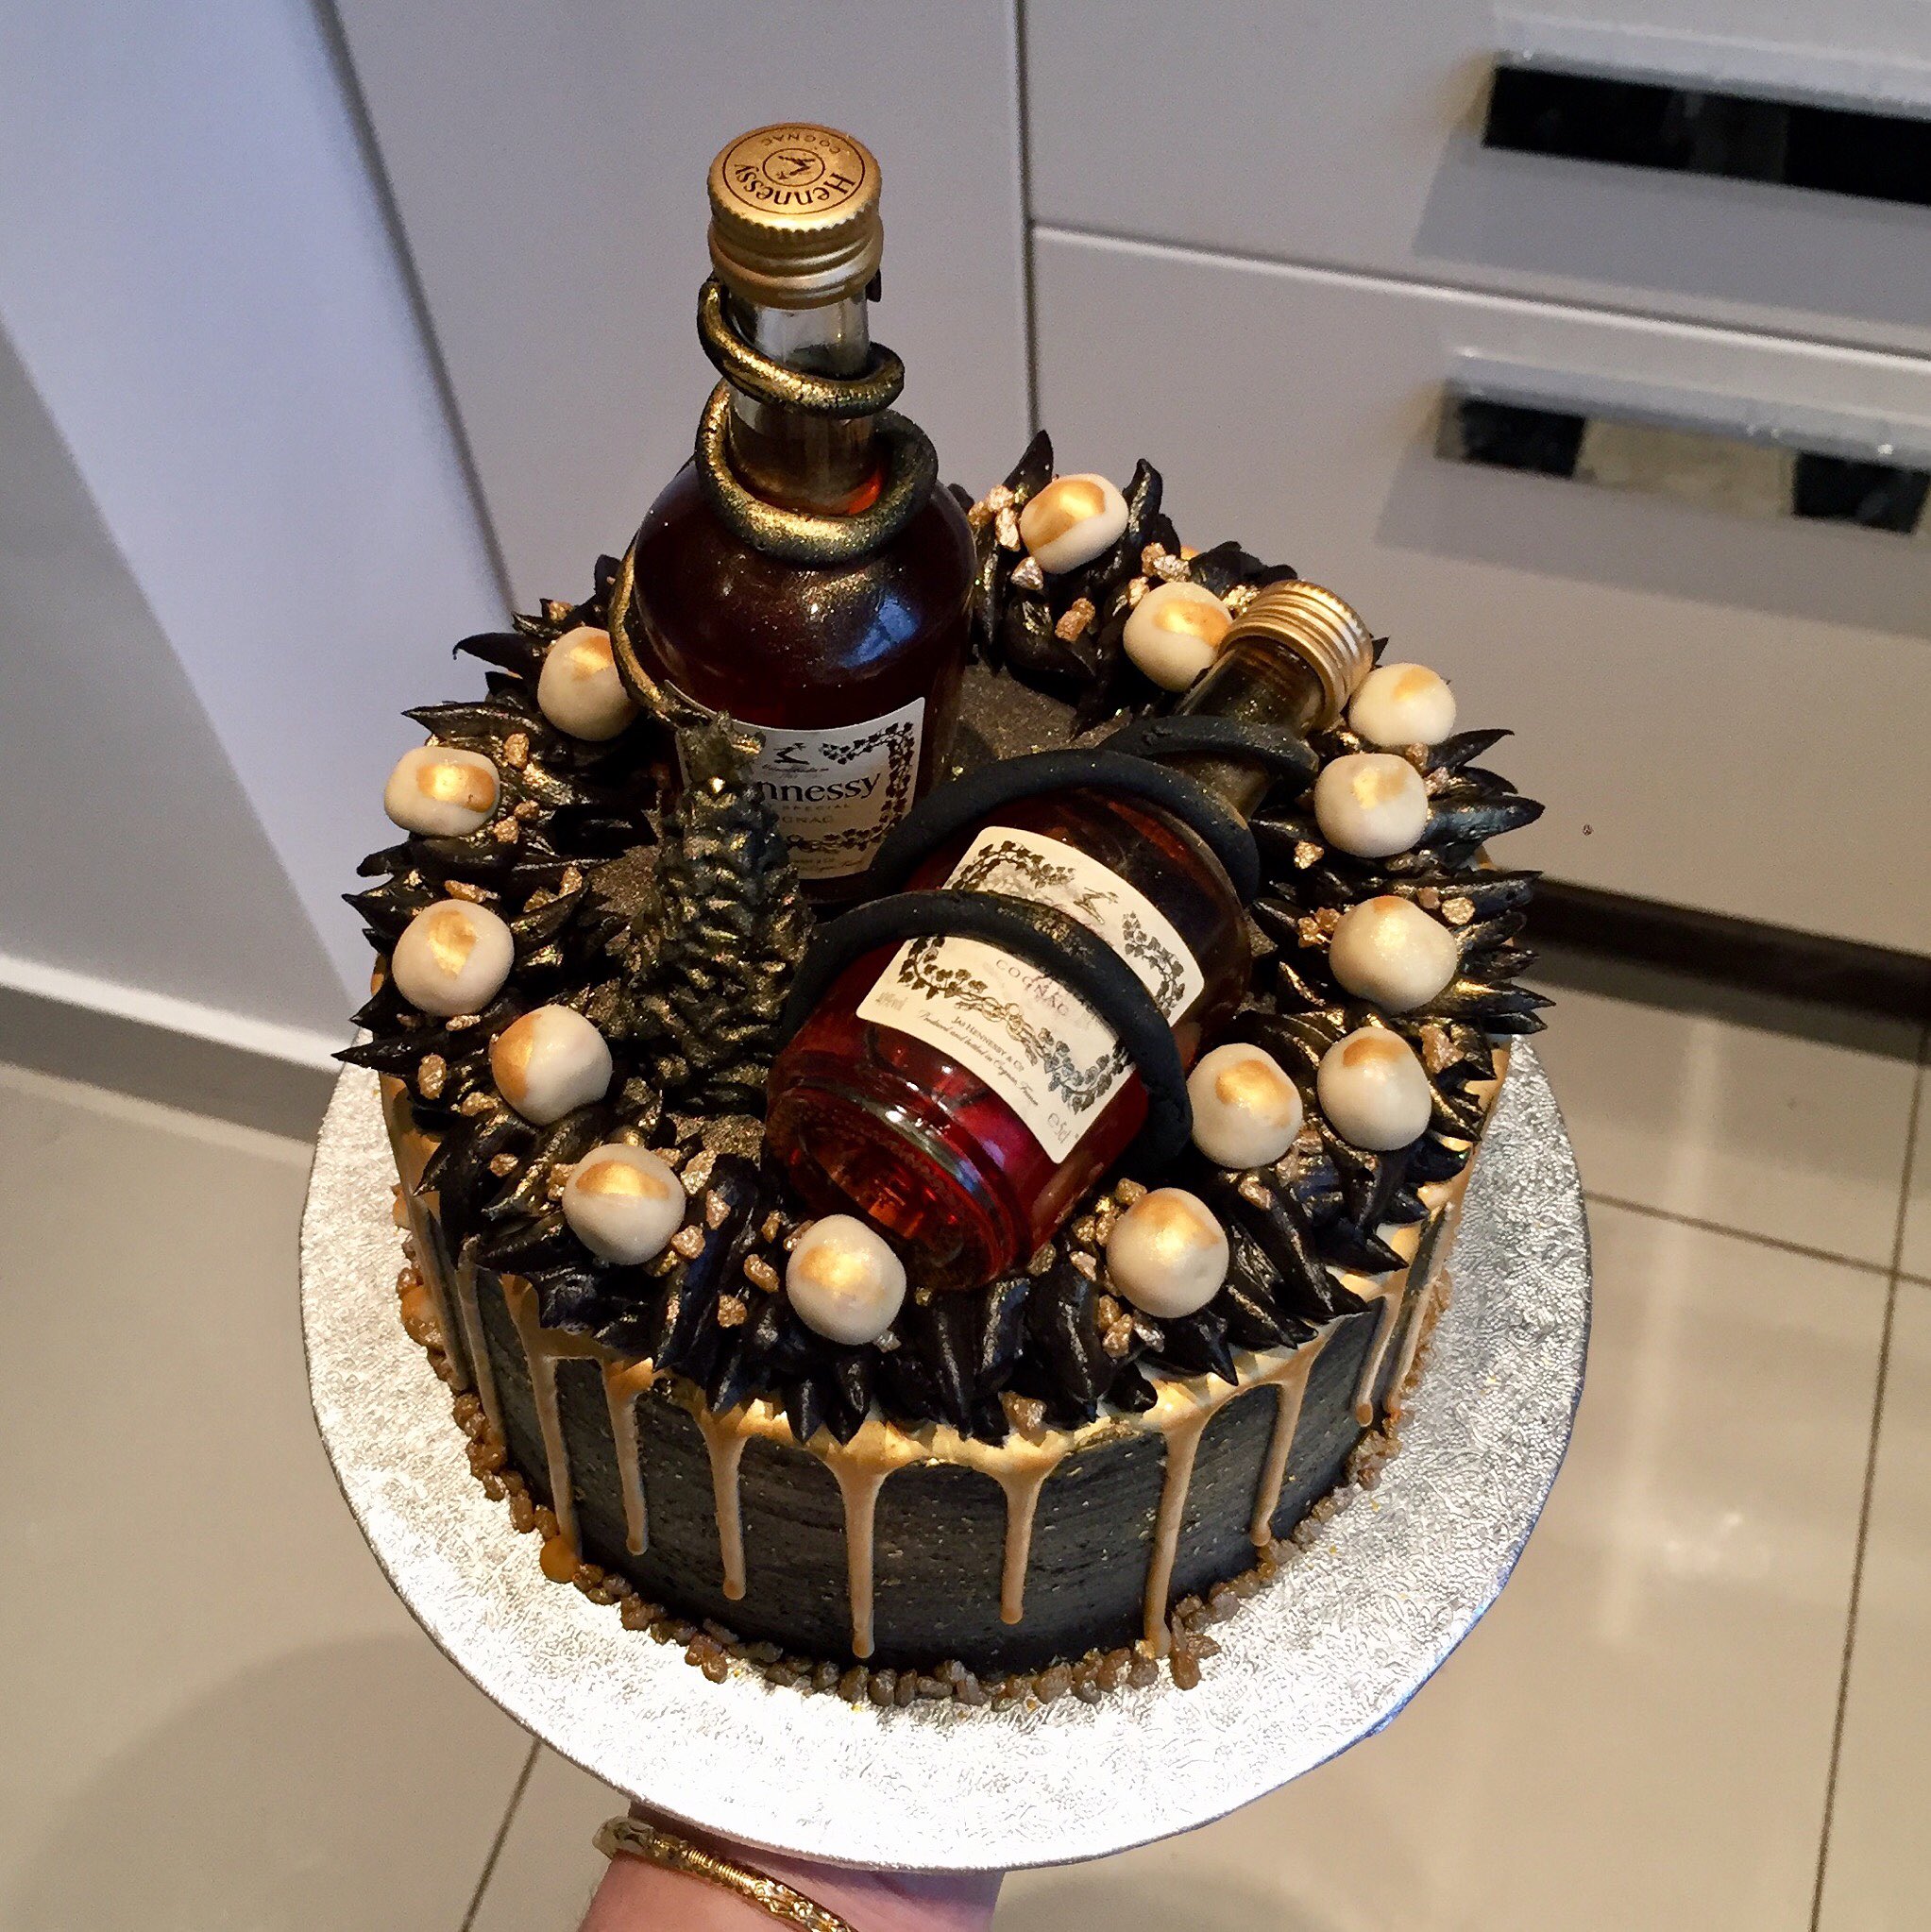 Pashmk Black And Gold Hennessy Cake With My Cute Lil Sugar Paste Christmas Tree Lol T Co 2kuzt8oh3n Twitter